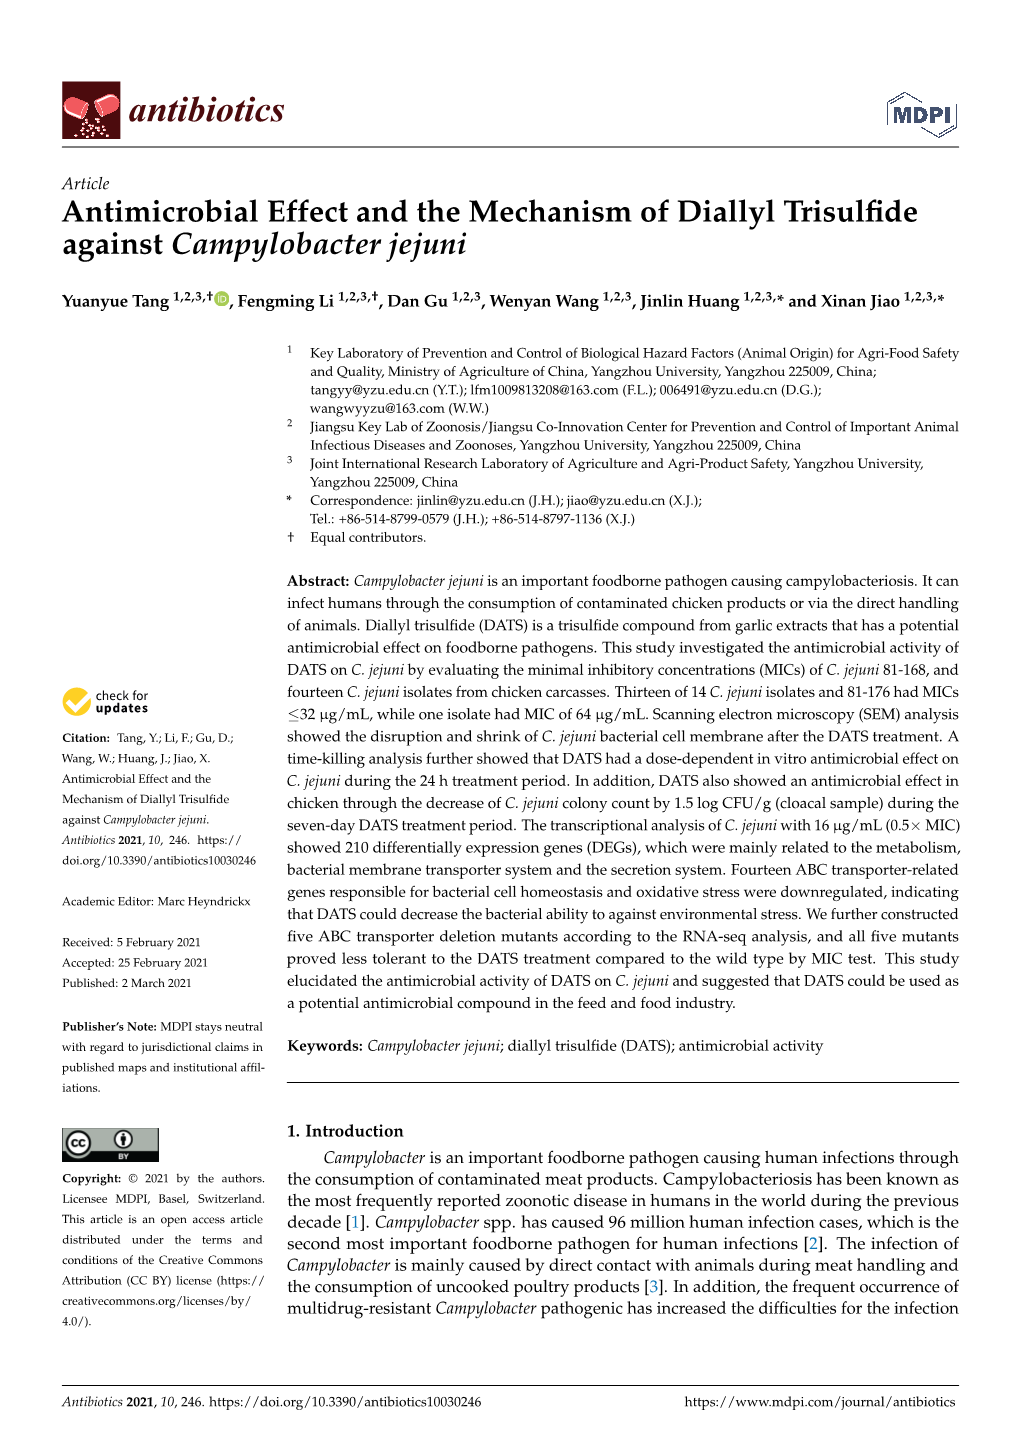 Antimicrobial Effect and the Mechanism of Diallyl Trisulfide Against Campylobacter Jejuni